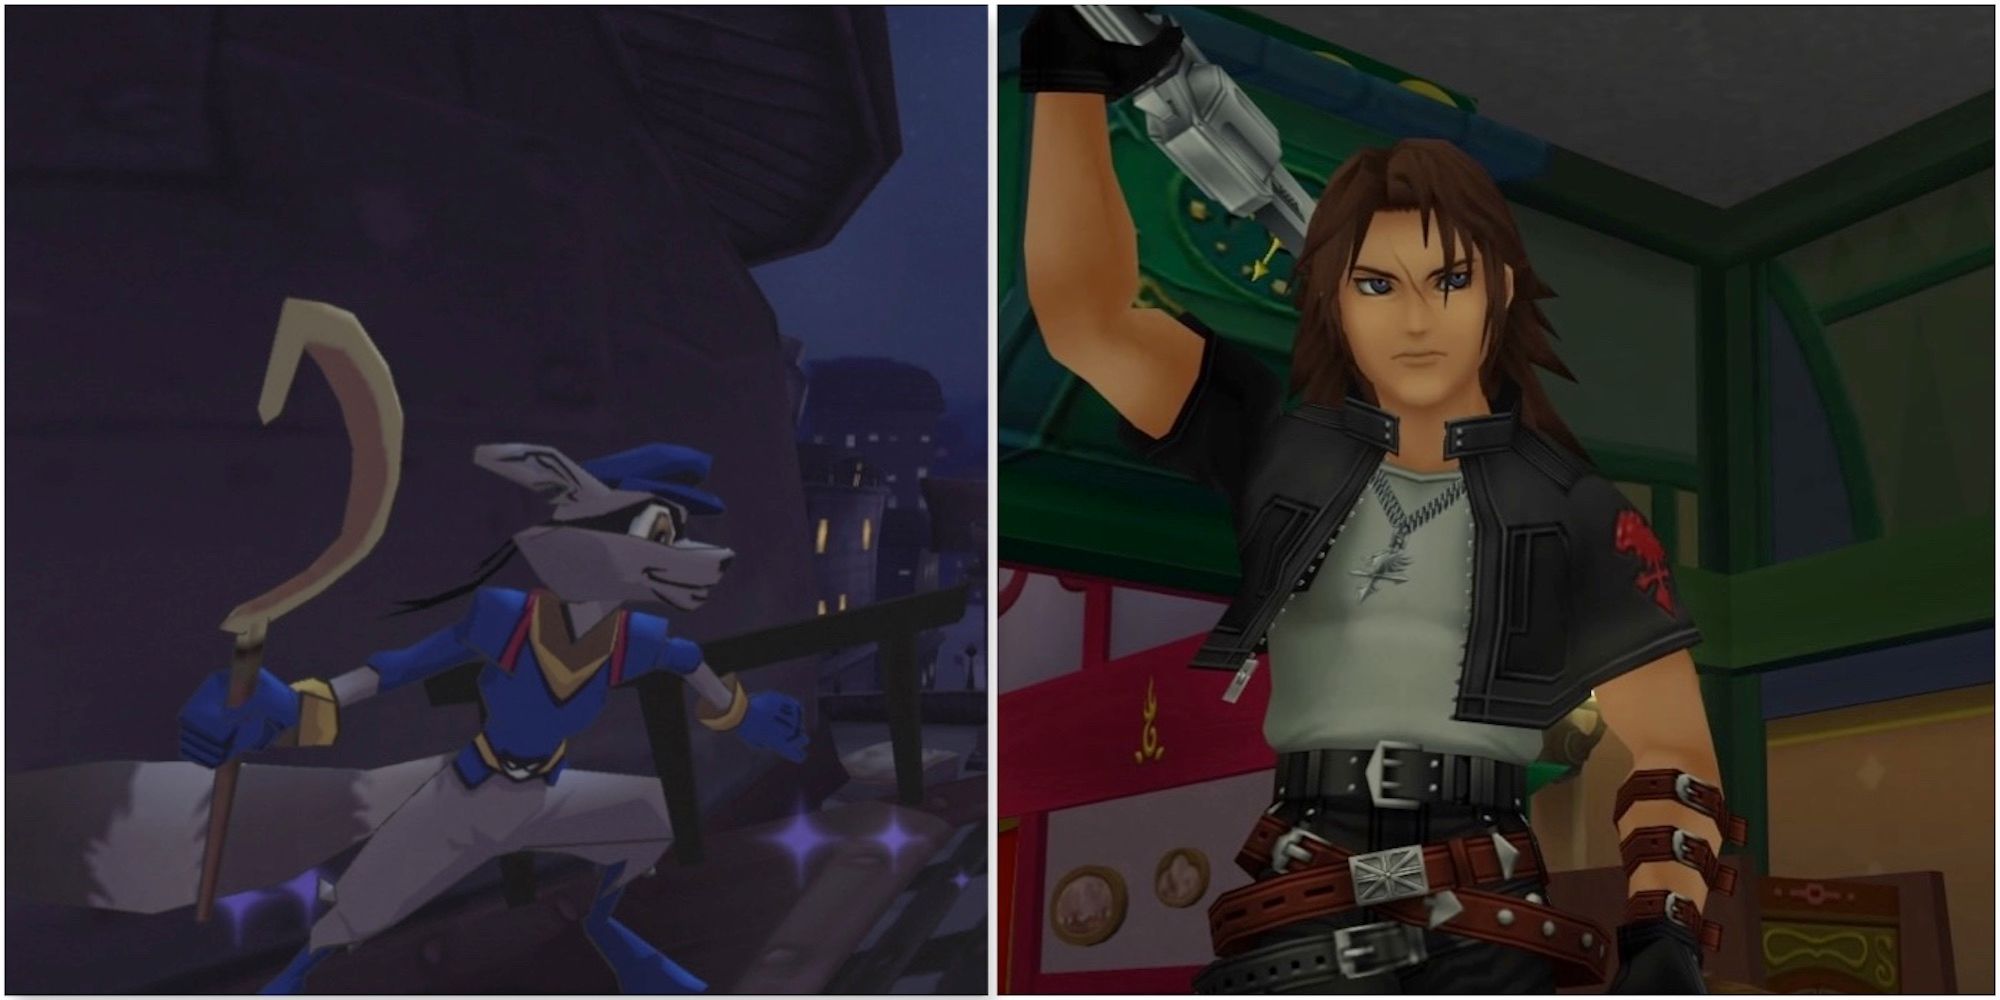 Sly Cooper from Sly Cooper and Leon from Kingdom Hearts